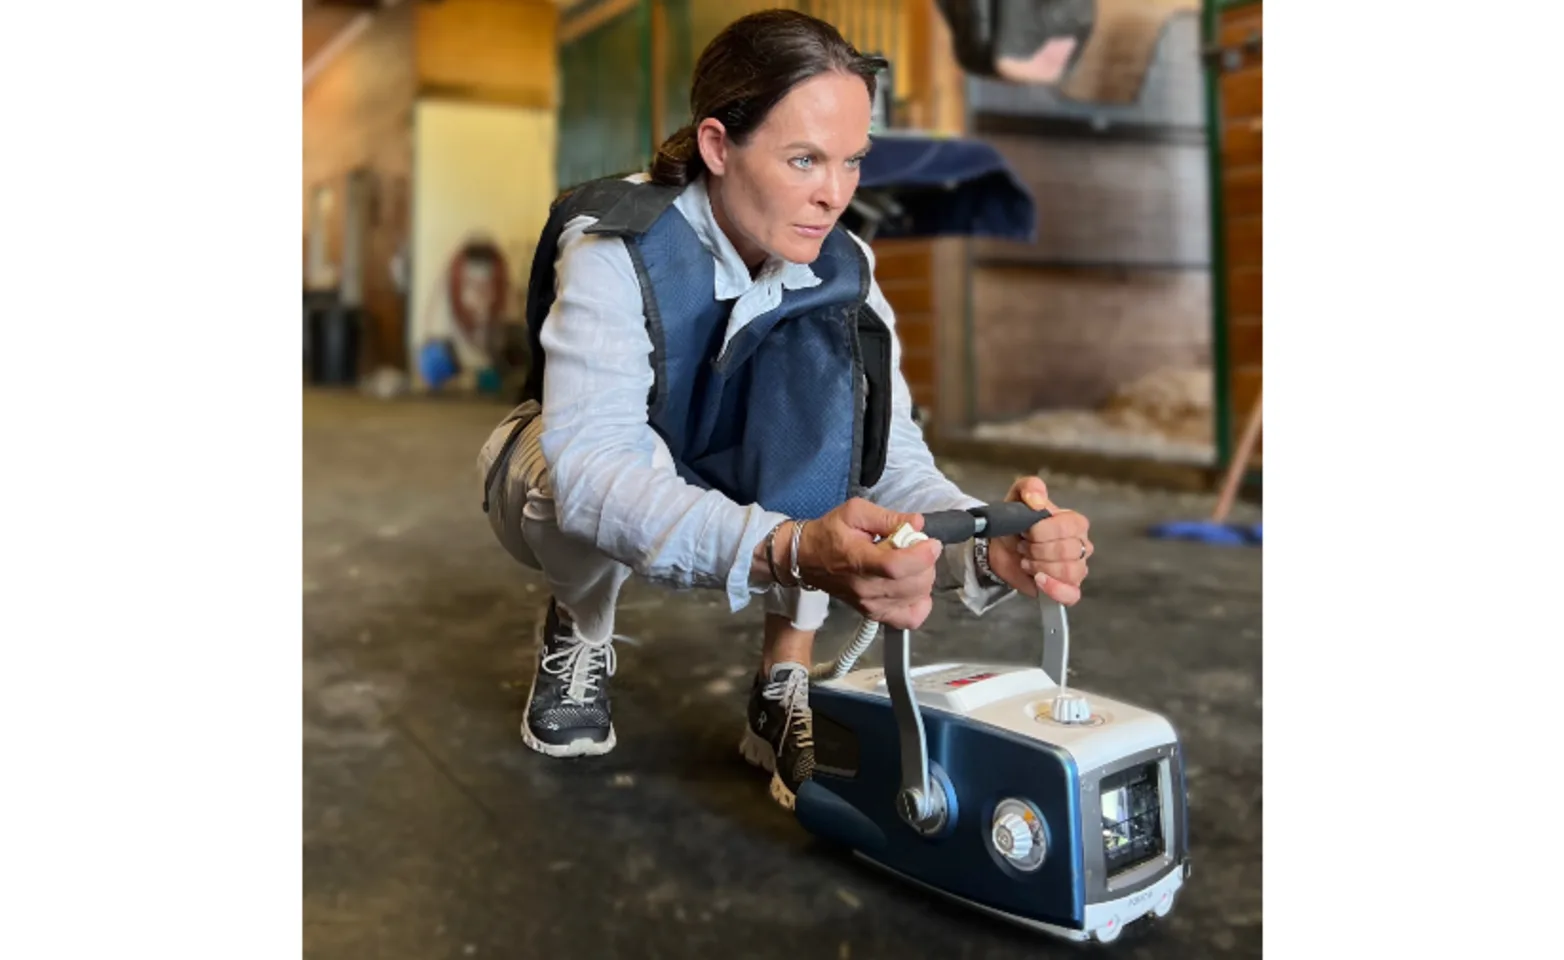 Dr. Tiffany Marr takes radiographs in a barn aisle